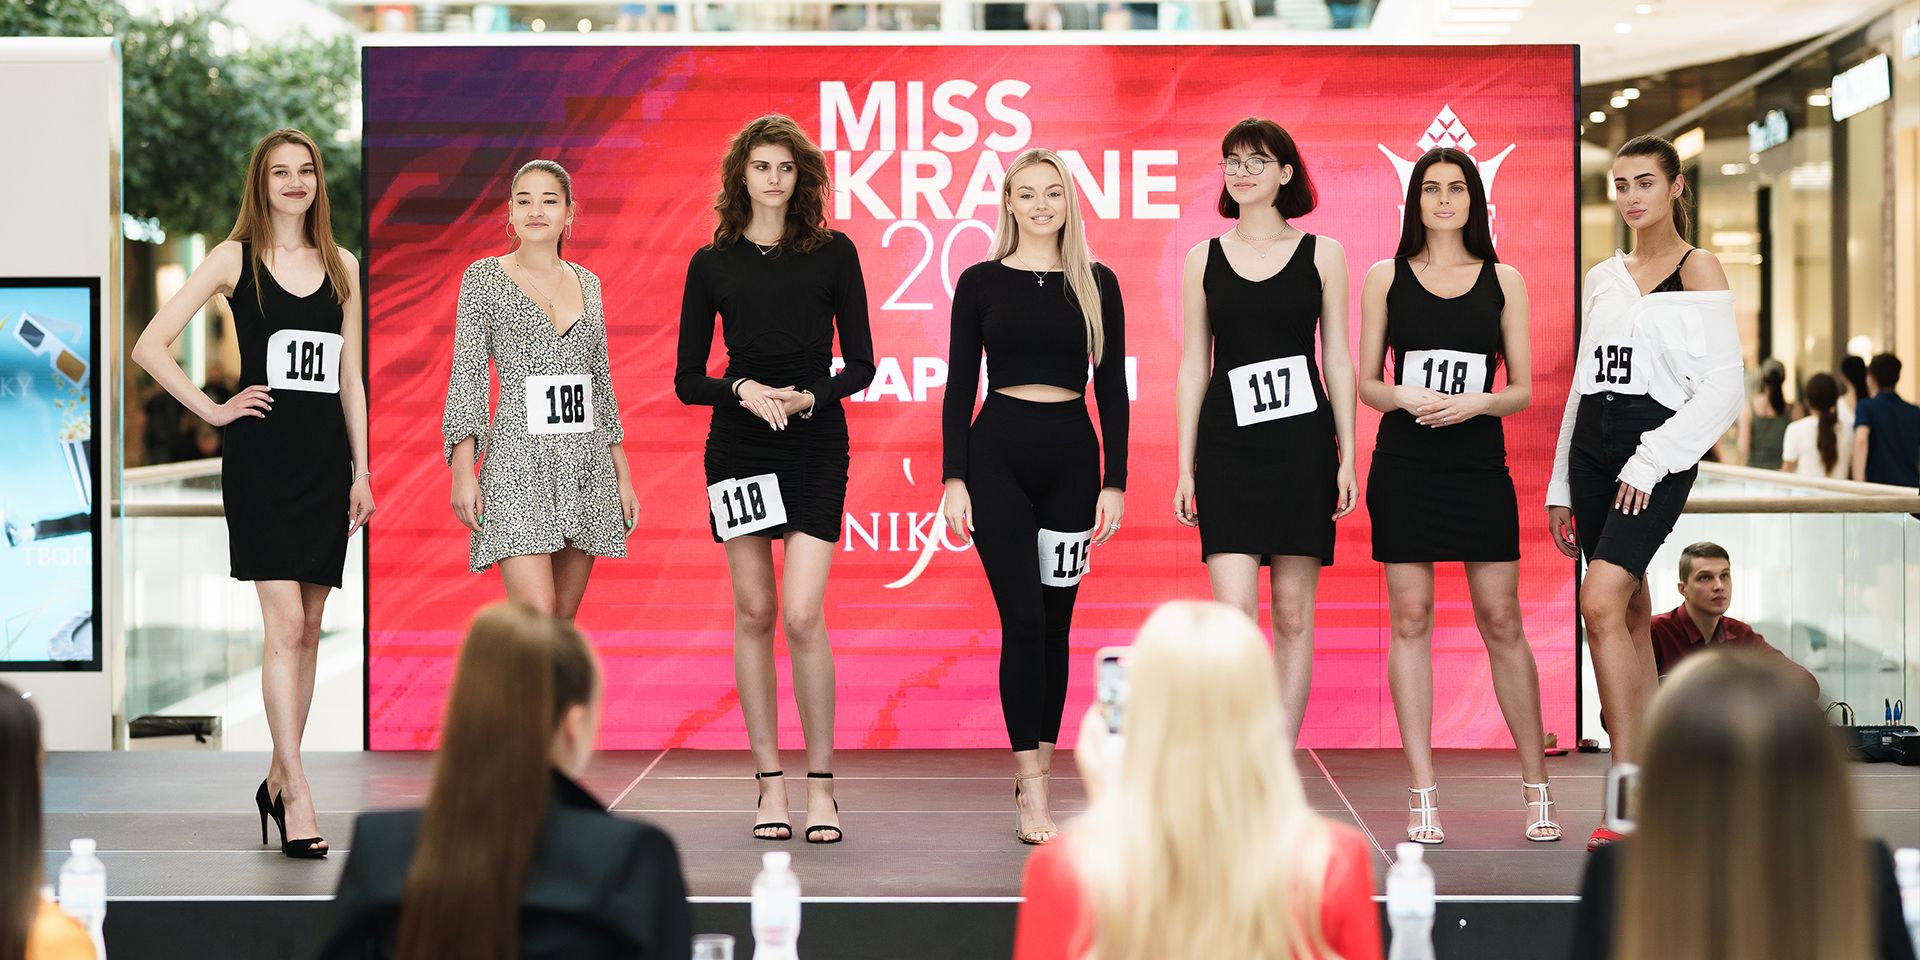 The second open casting call for "Miss Ukraine-2021" was held in Kharkiv